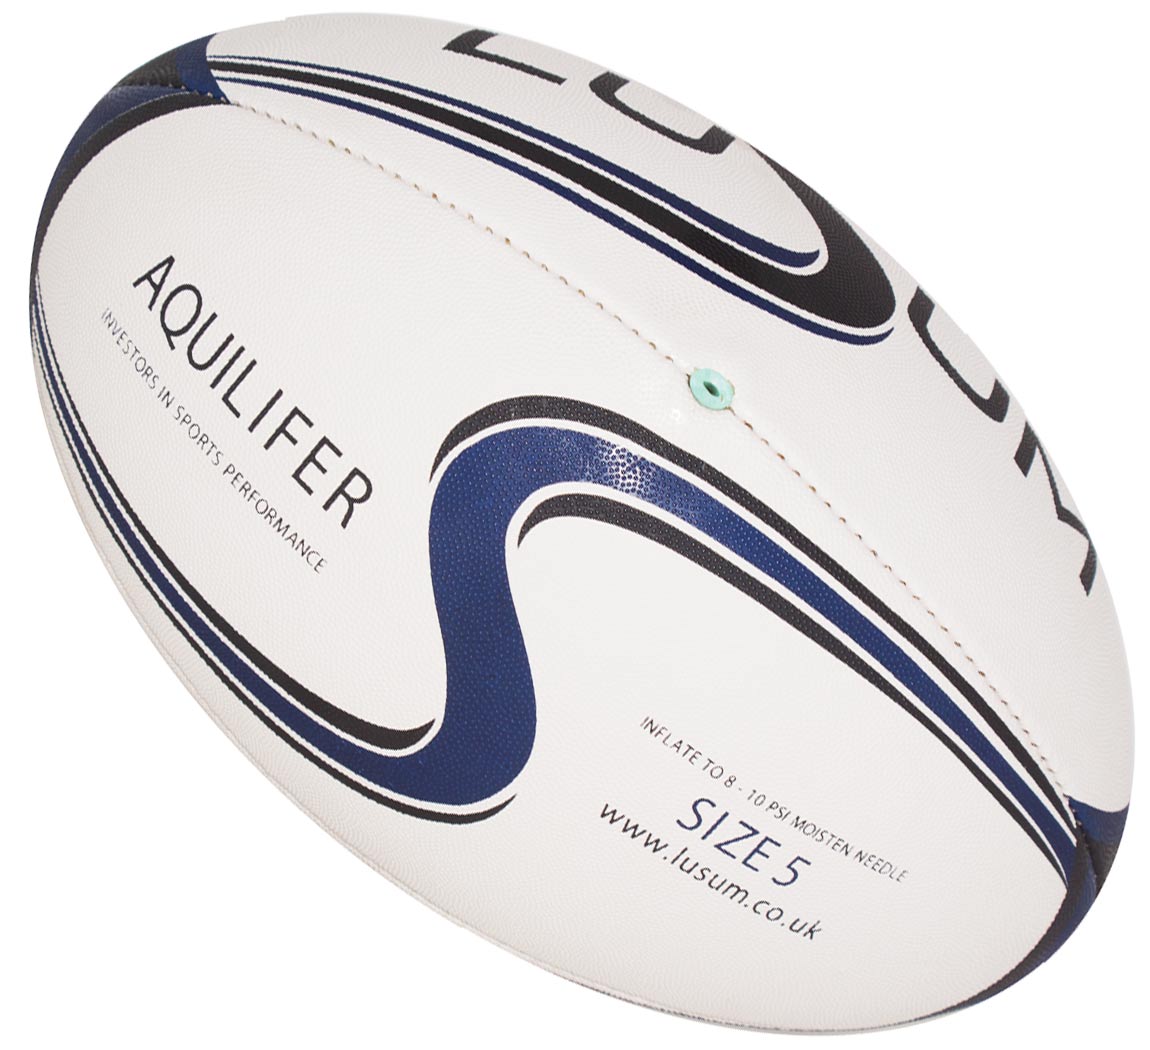 Lusum Aquilifer Rugby Ball